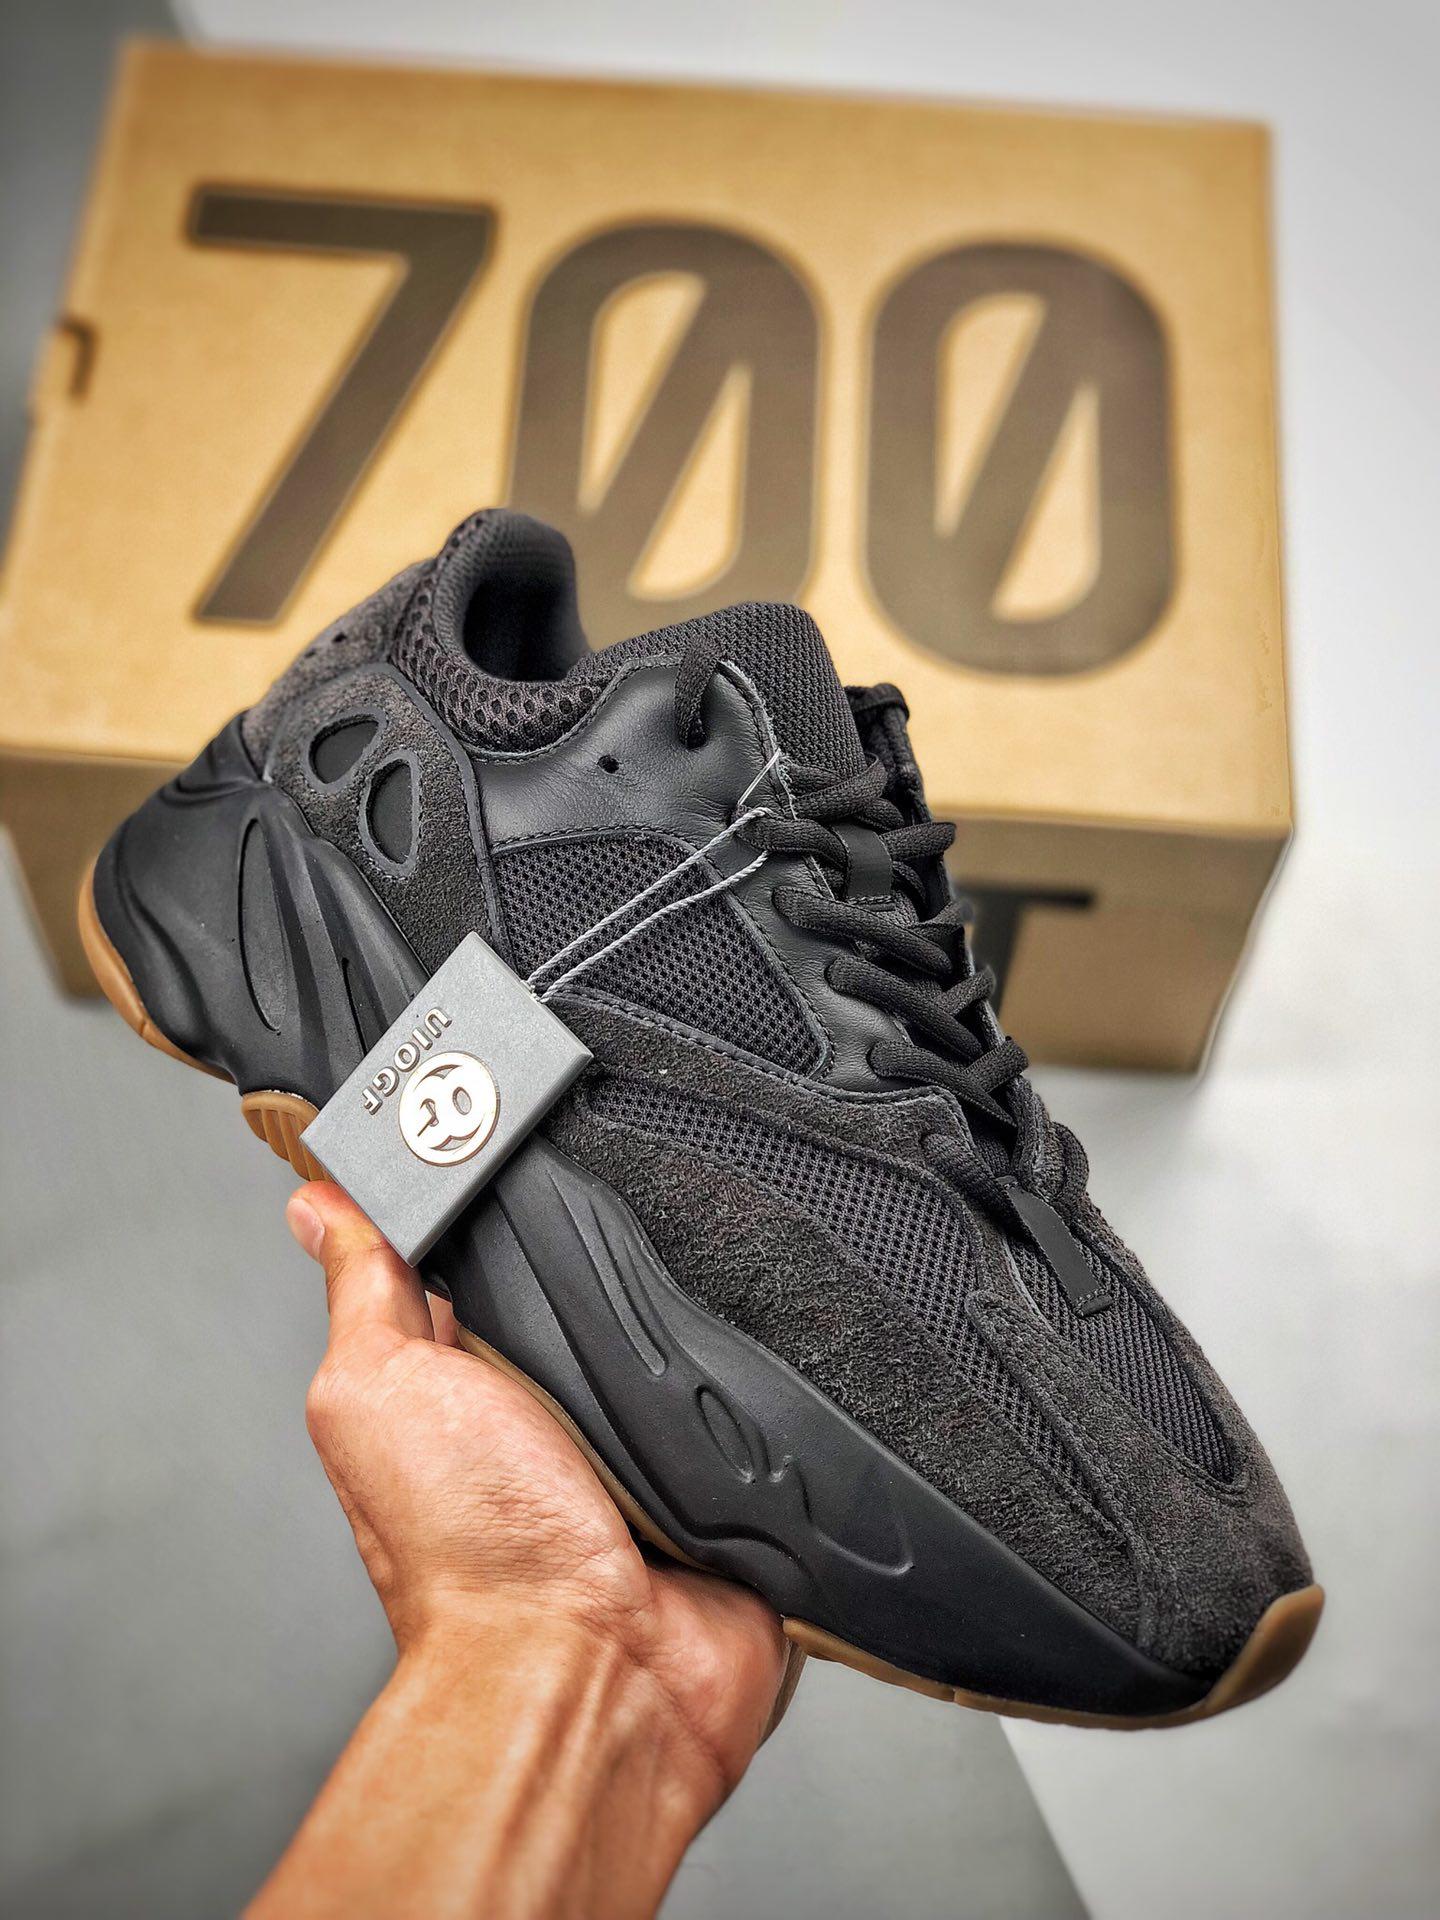 adidas Yeezy Boost 700 “Utility Black” FV5304 For Sale – Sneaker Hello